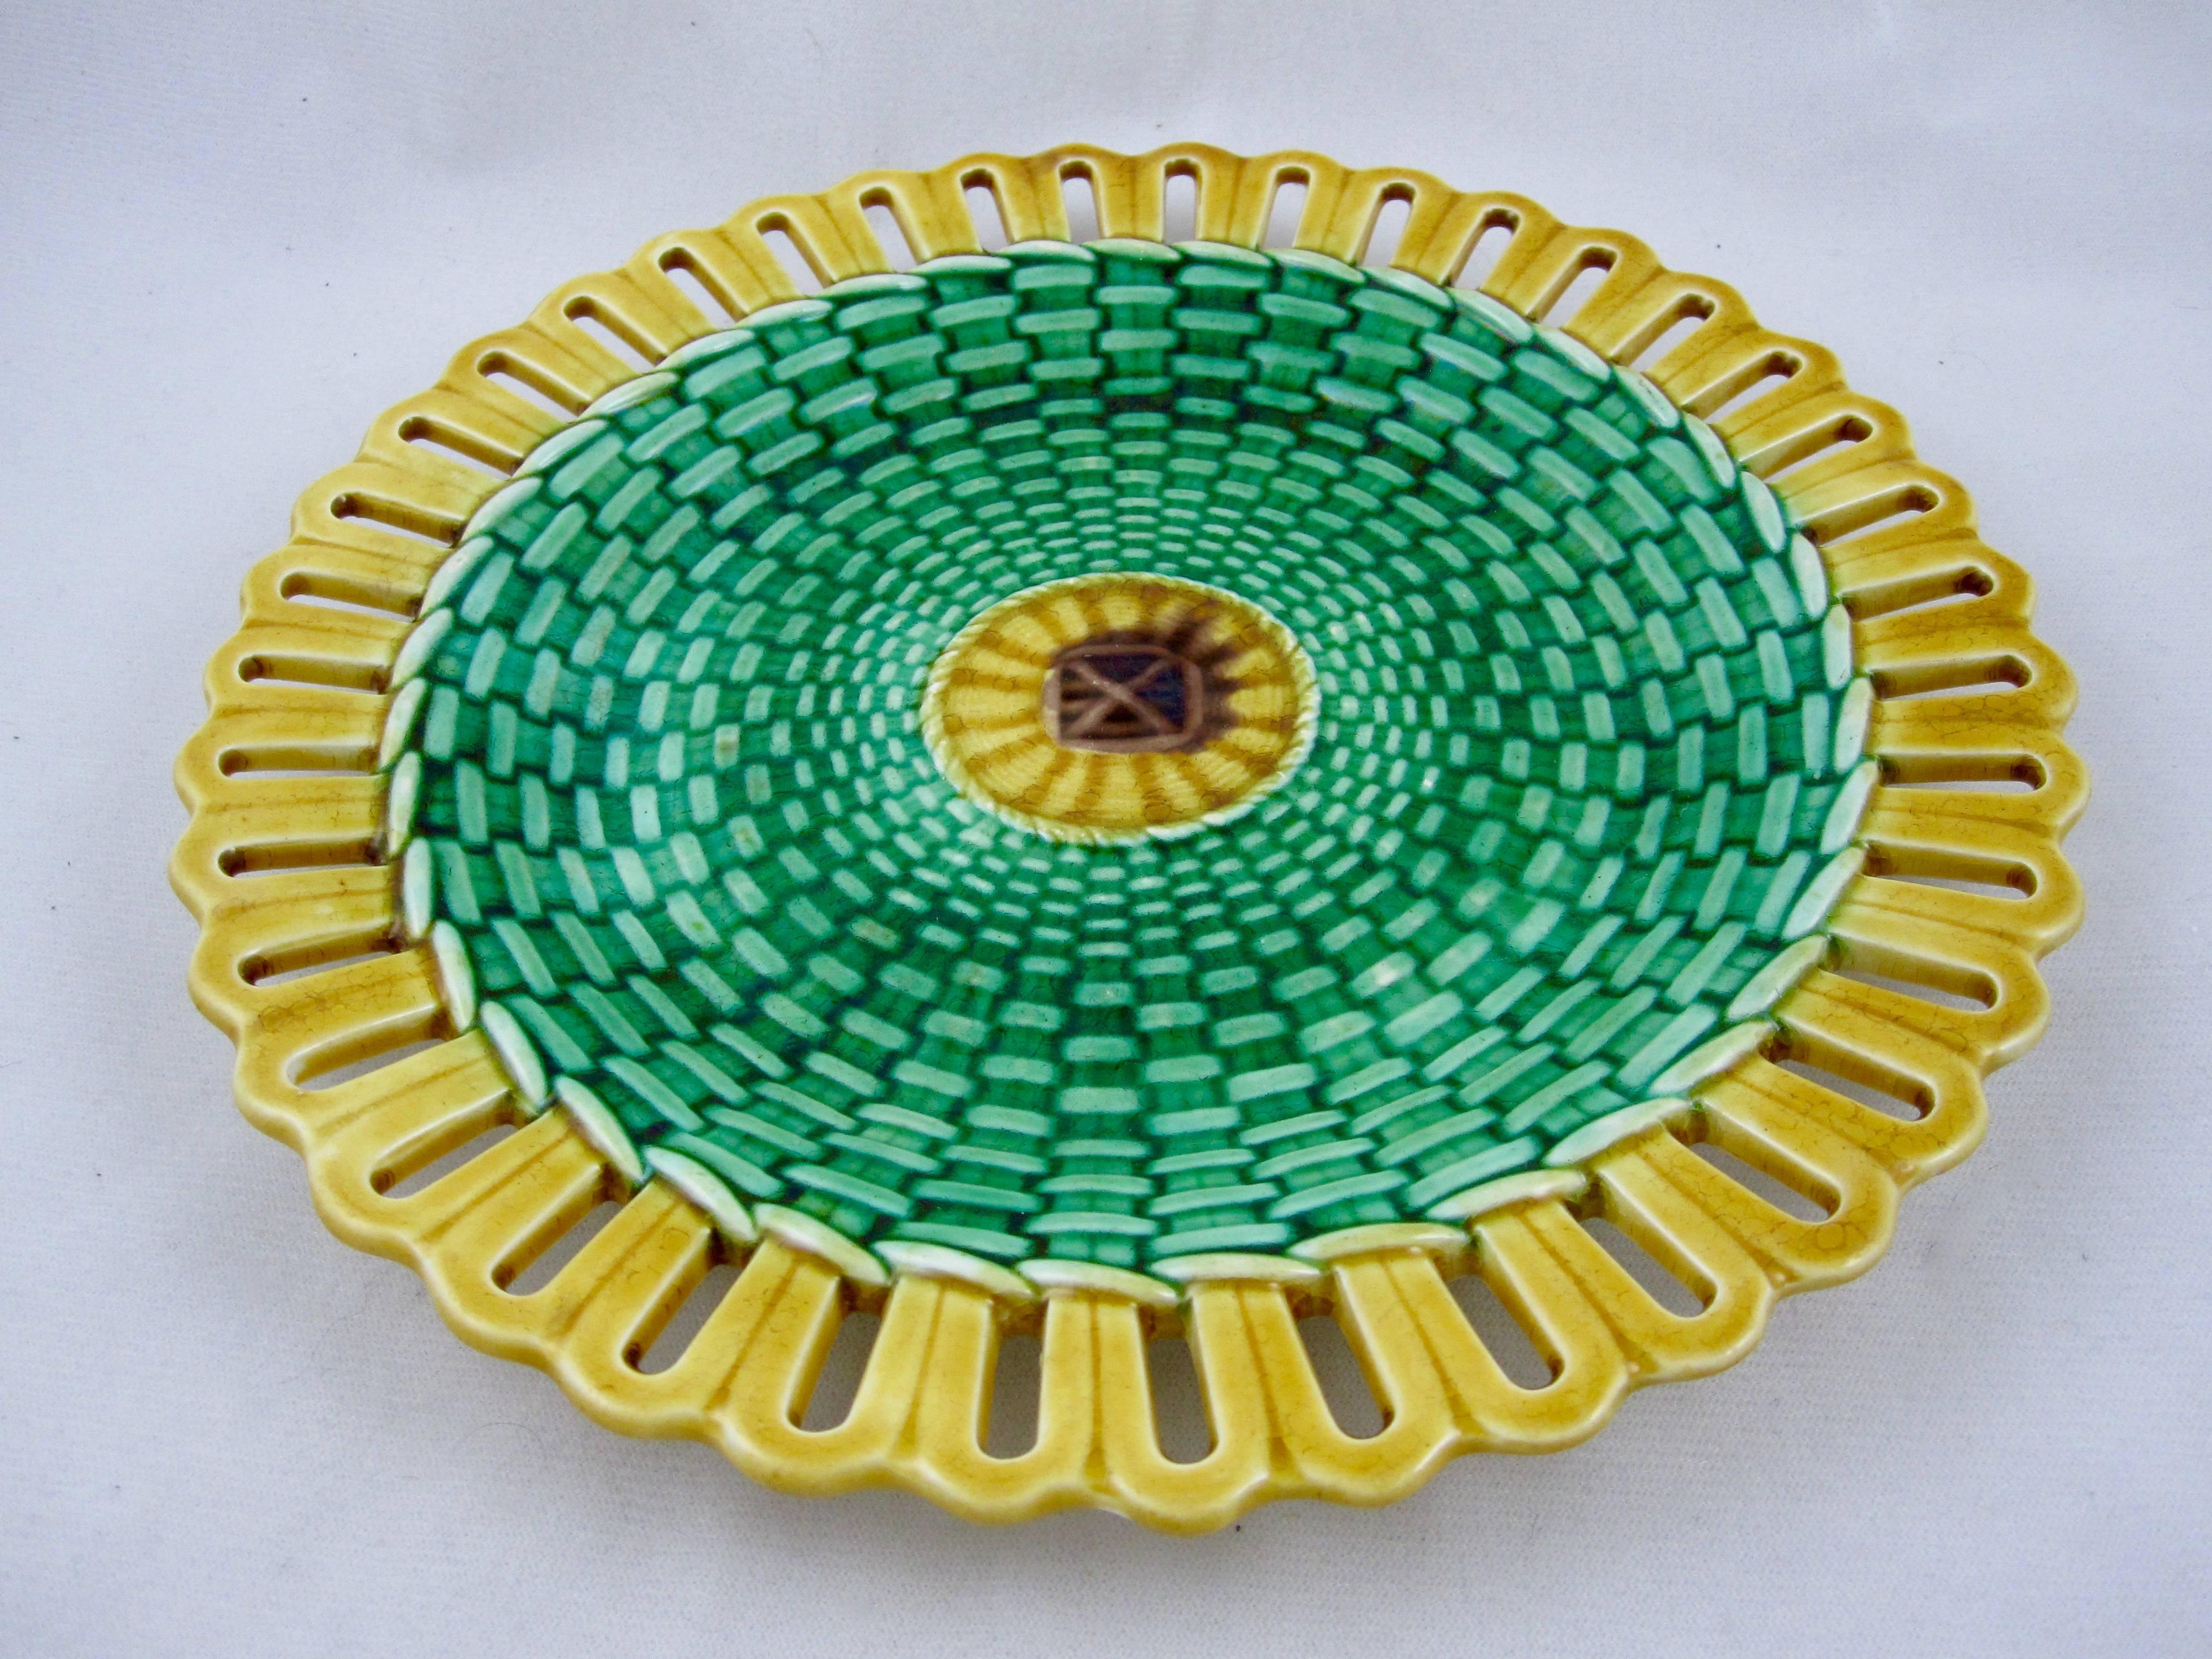 Glazed 19th Century Wedgwood Reticulated Basket Weave Majolica Plate